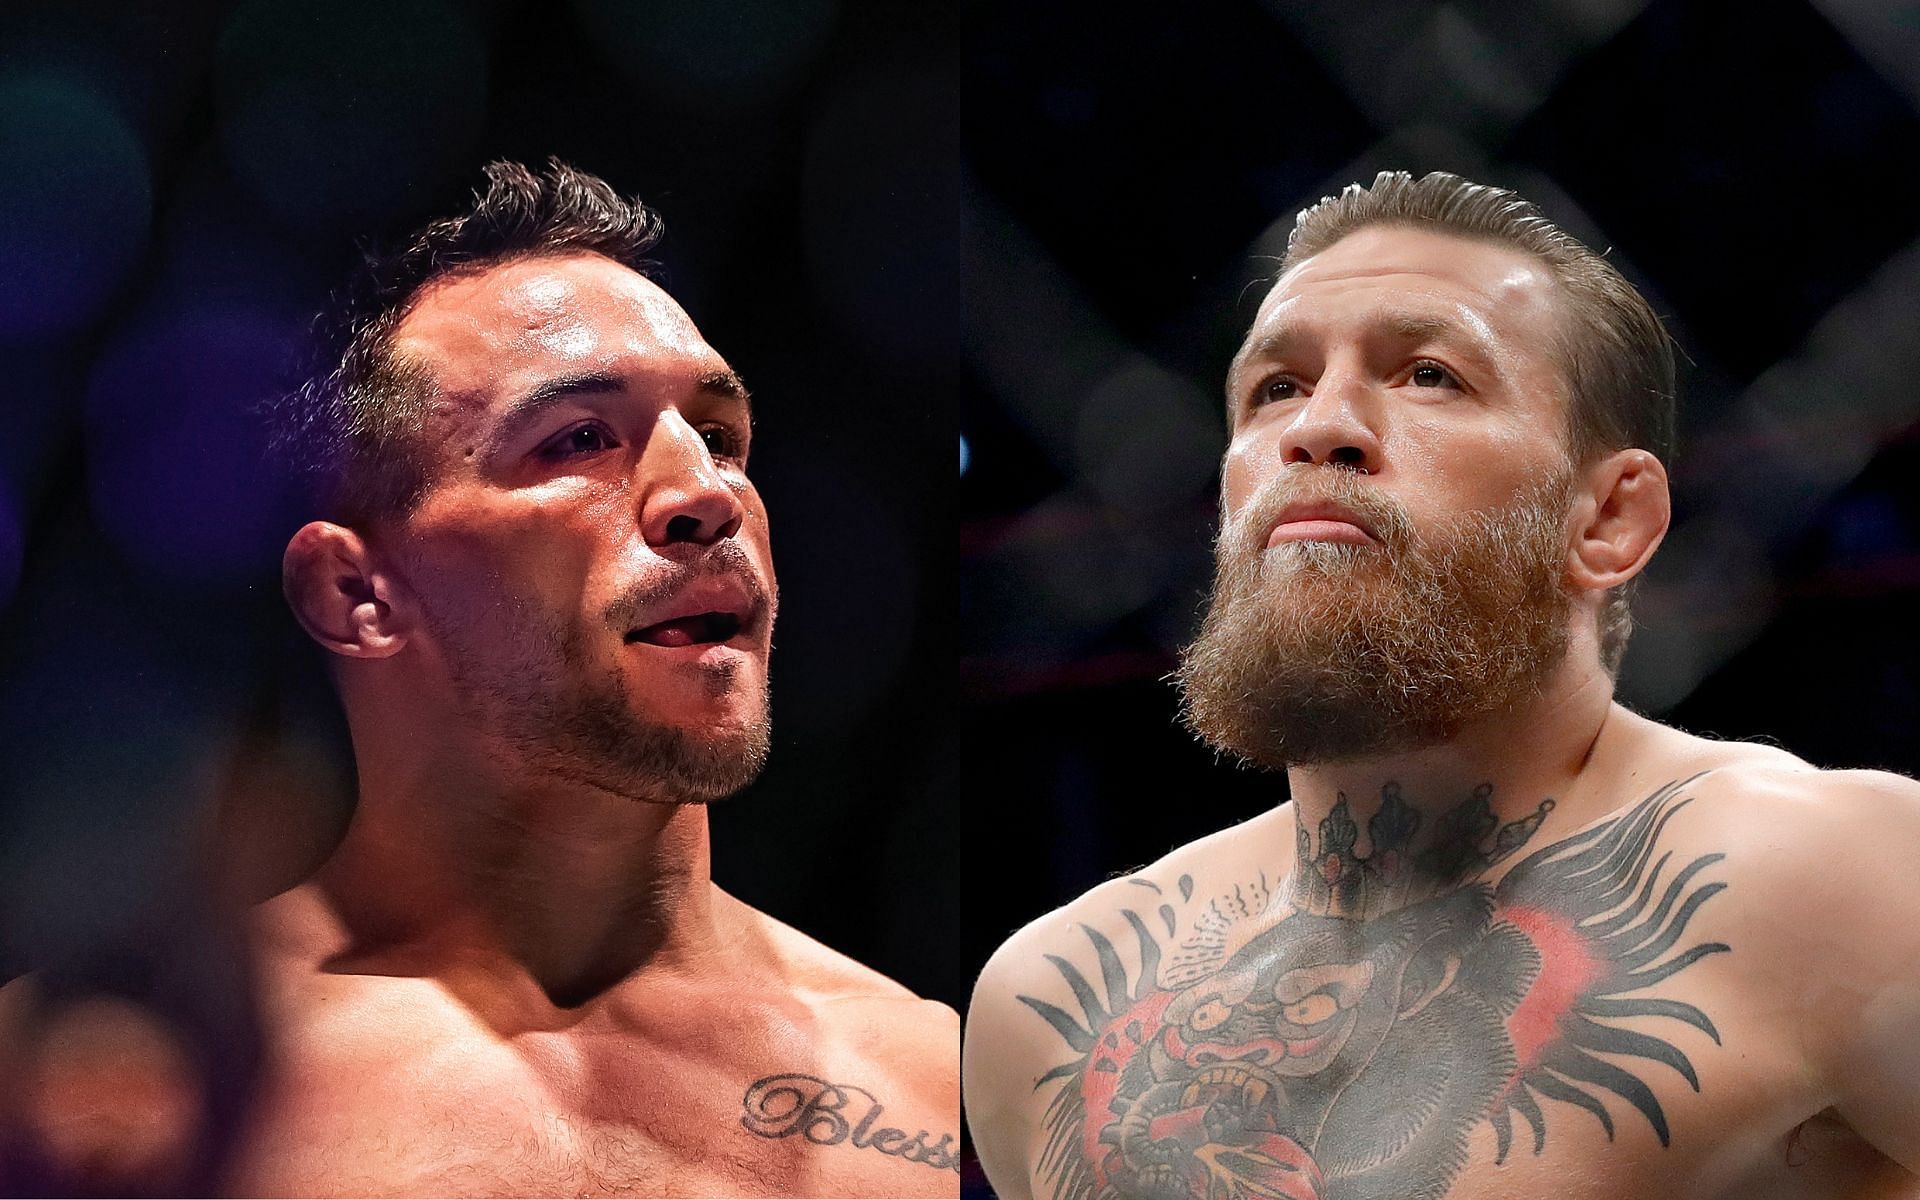 Michael Chandler (Left) and Conor McGregor (Right)